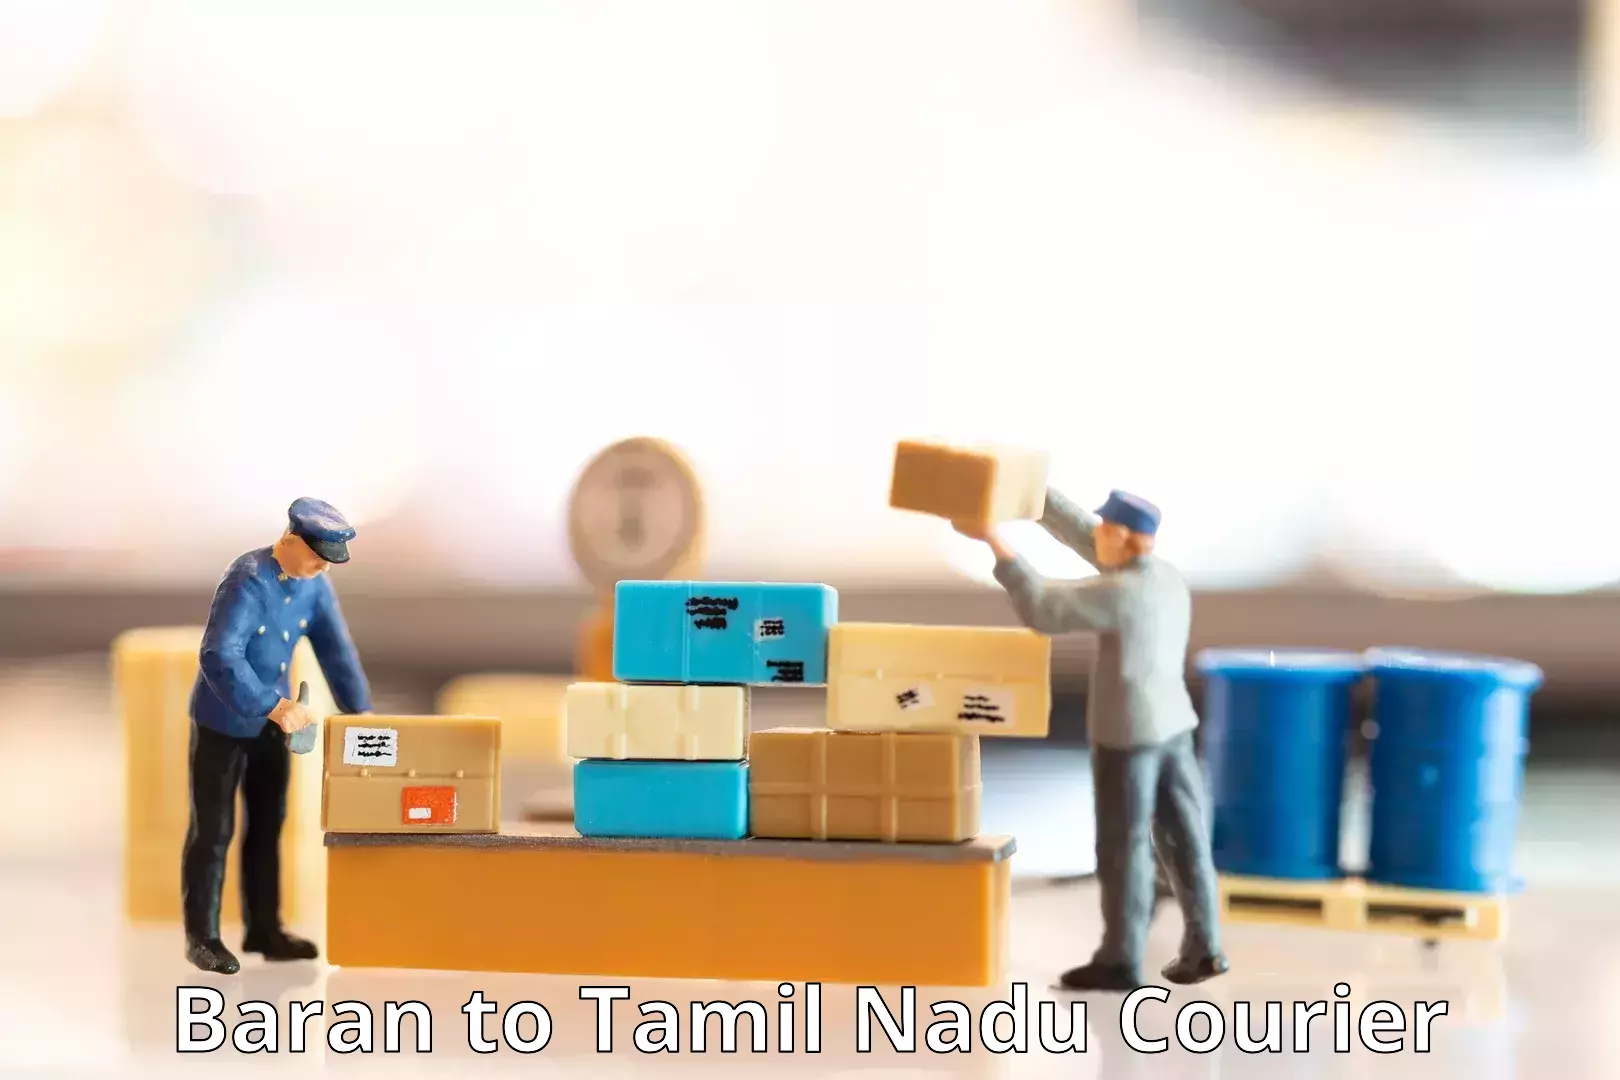 On-call courier service Baran to Tamil Nadu